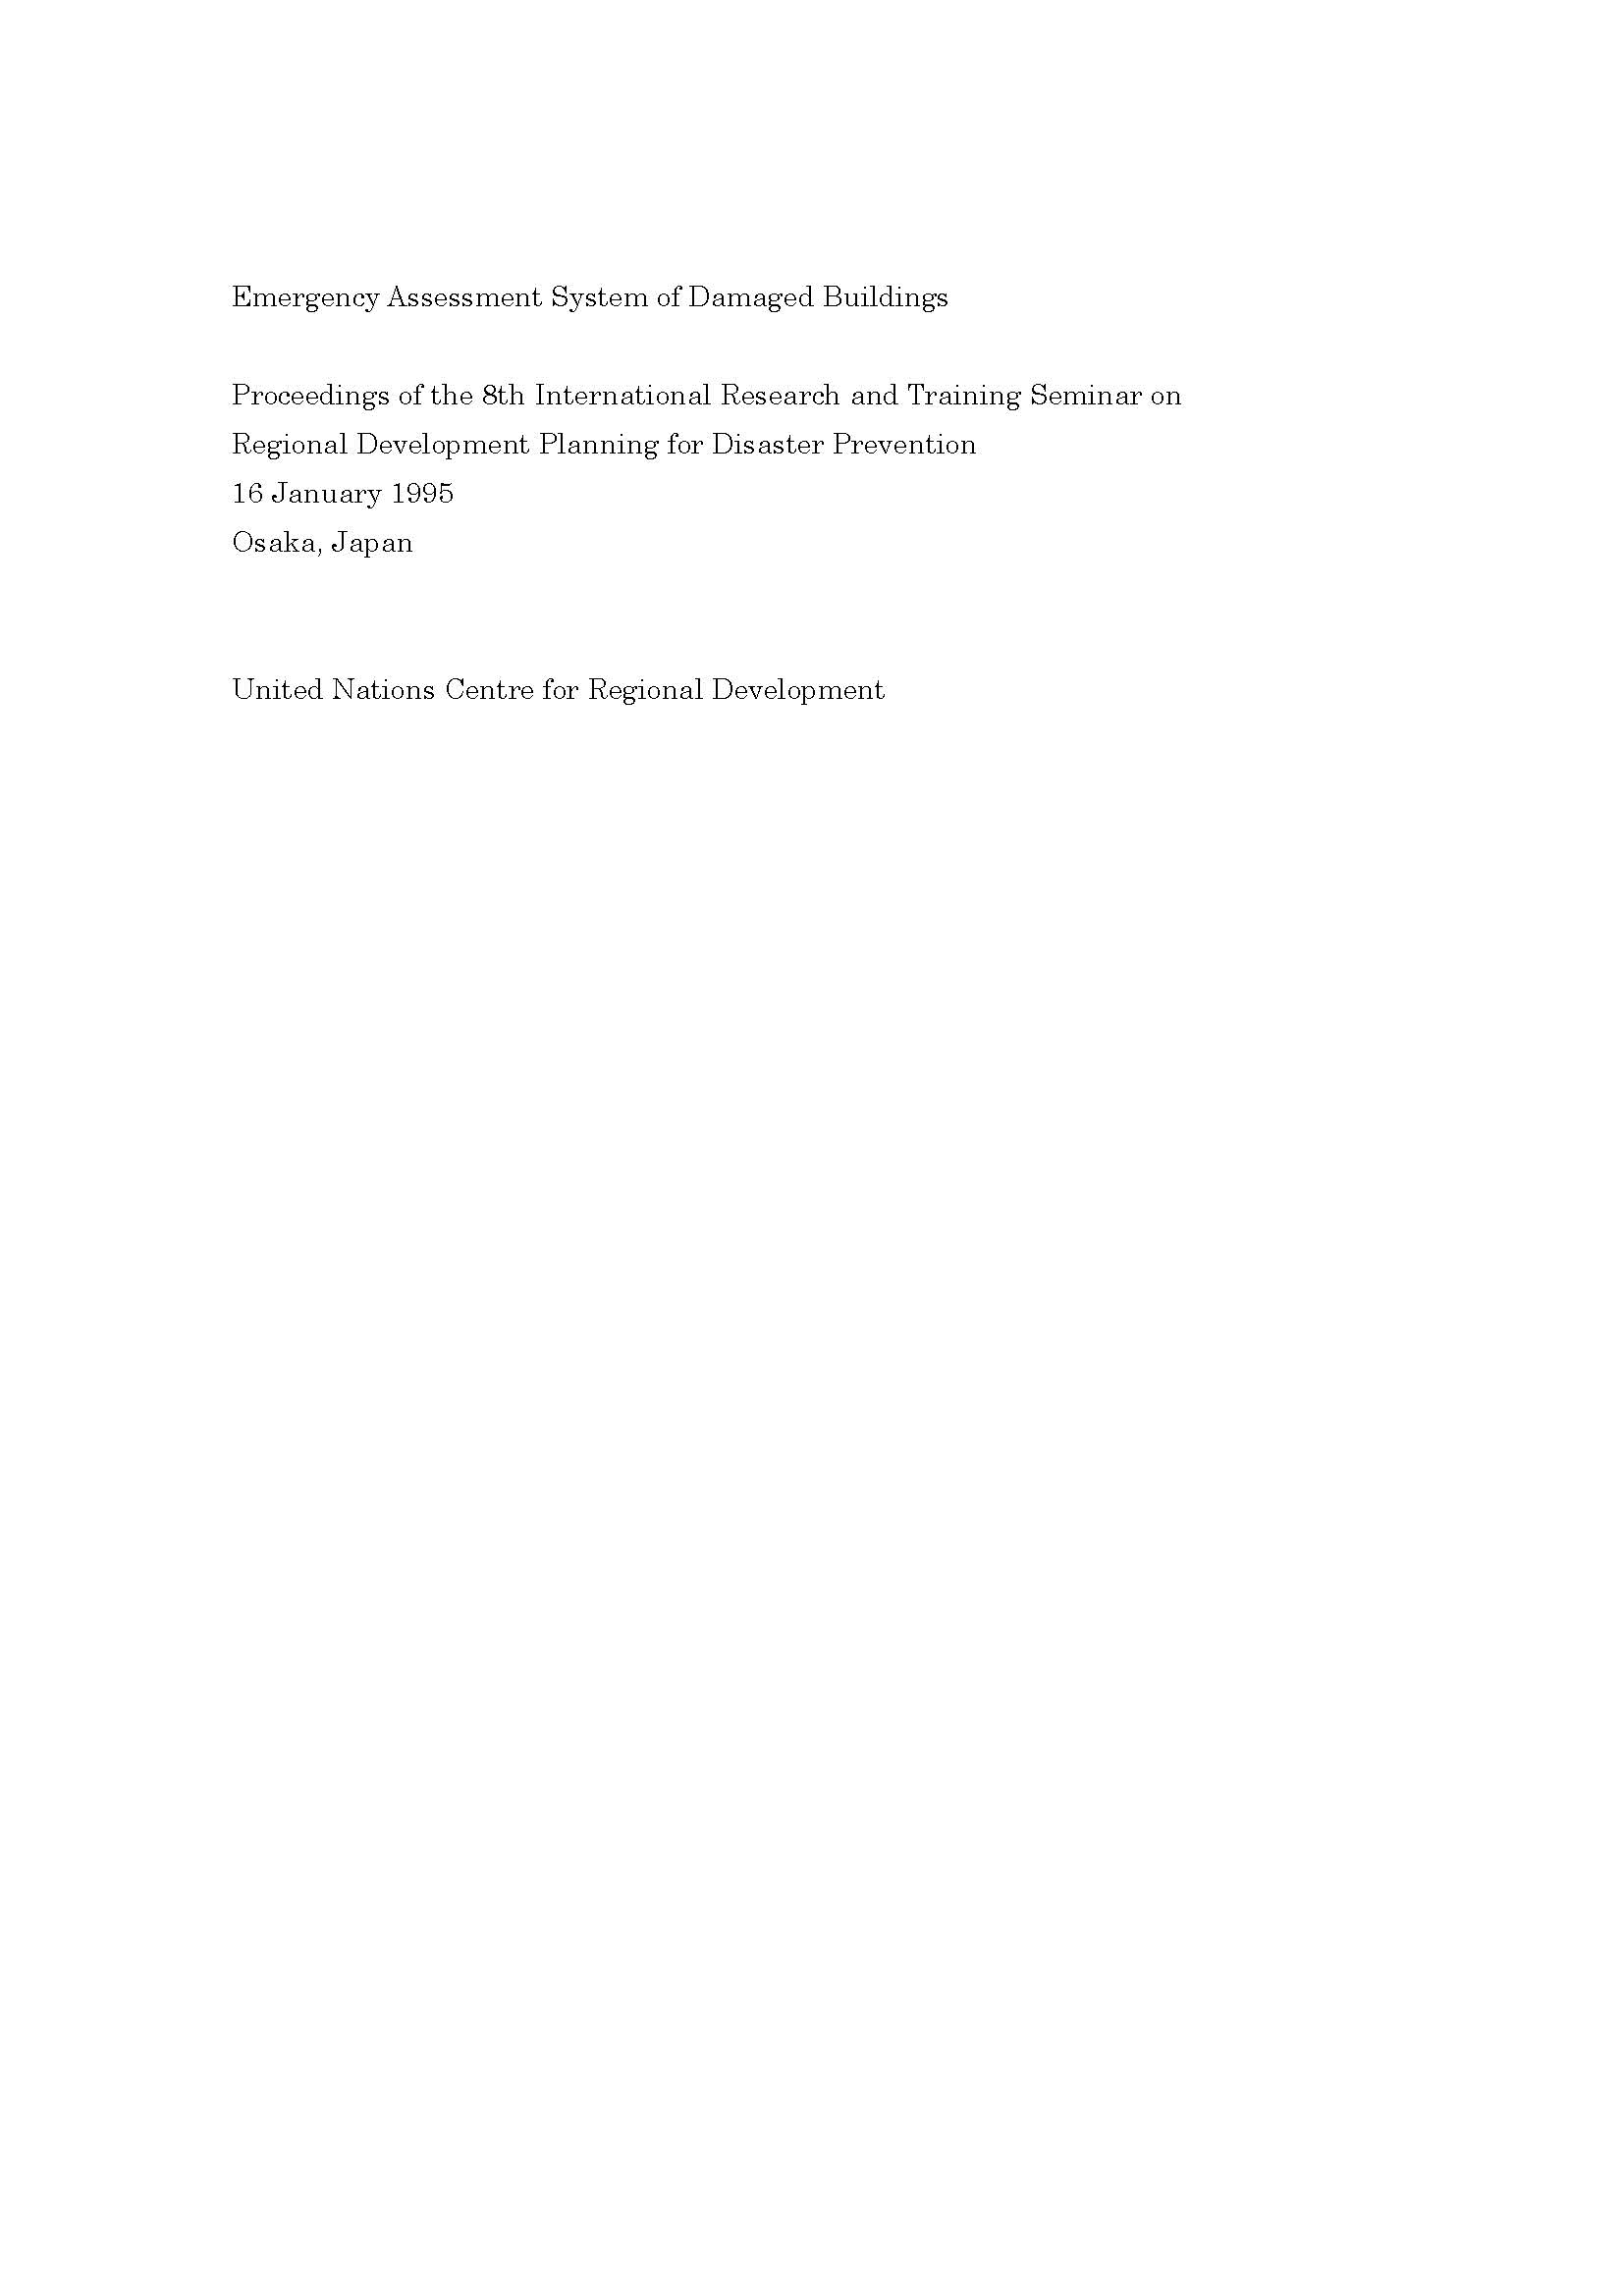 Cover of the report on Emergency Assessment System of Damaged Buildings